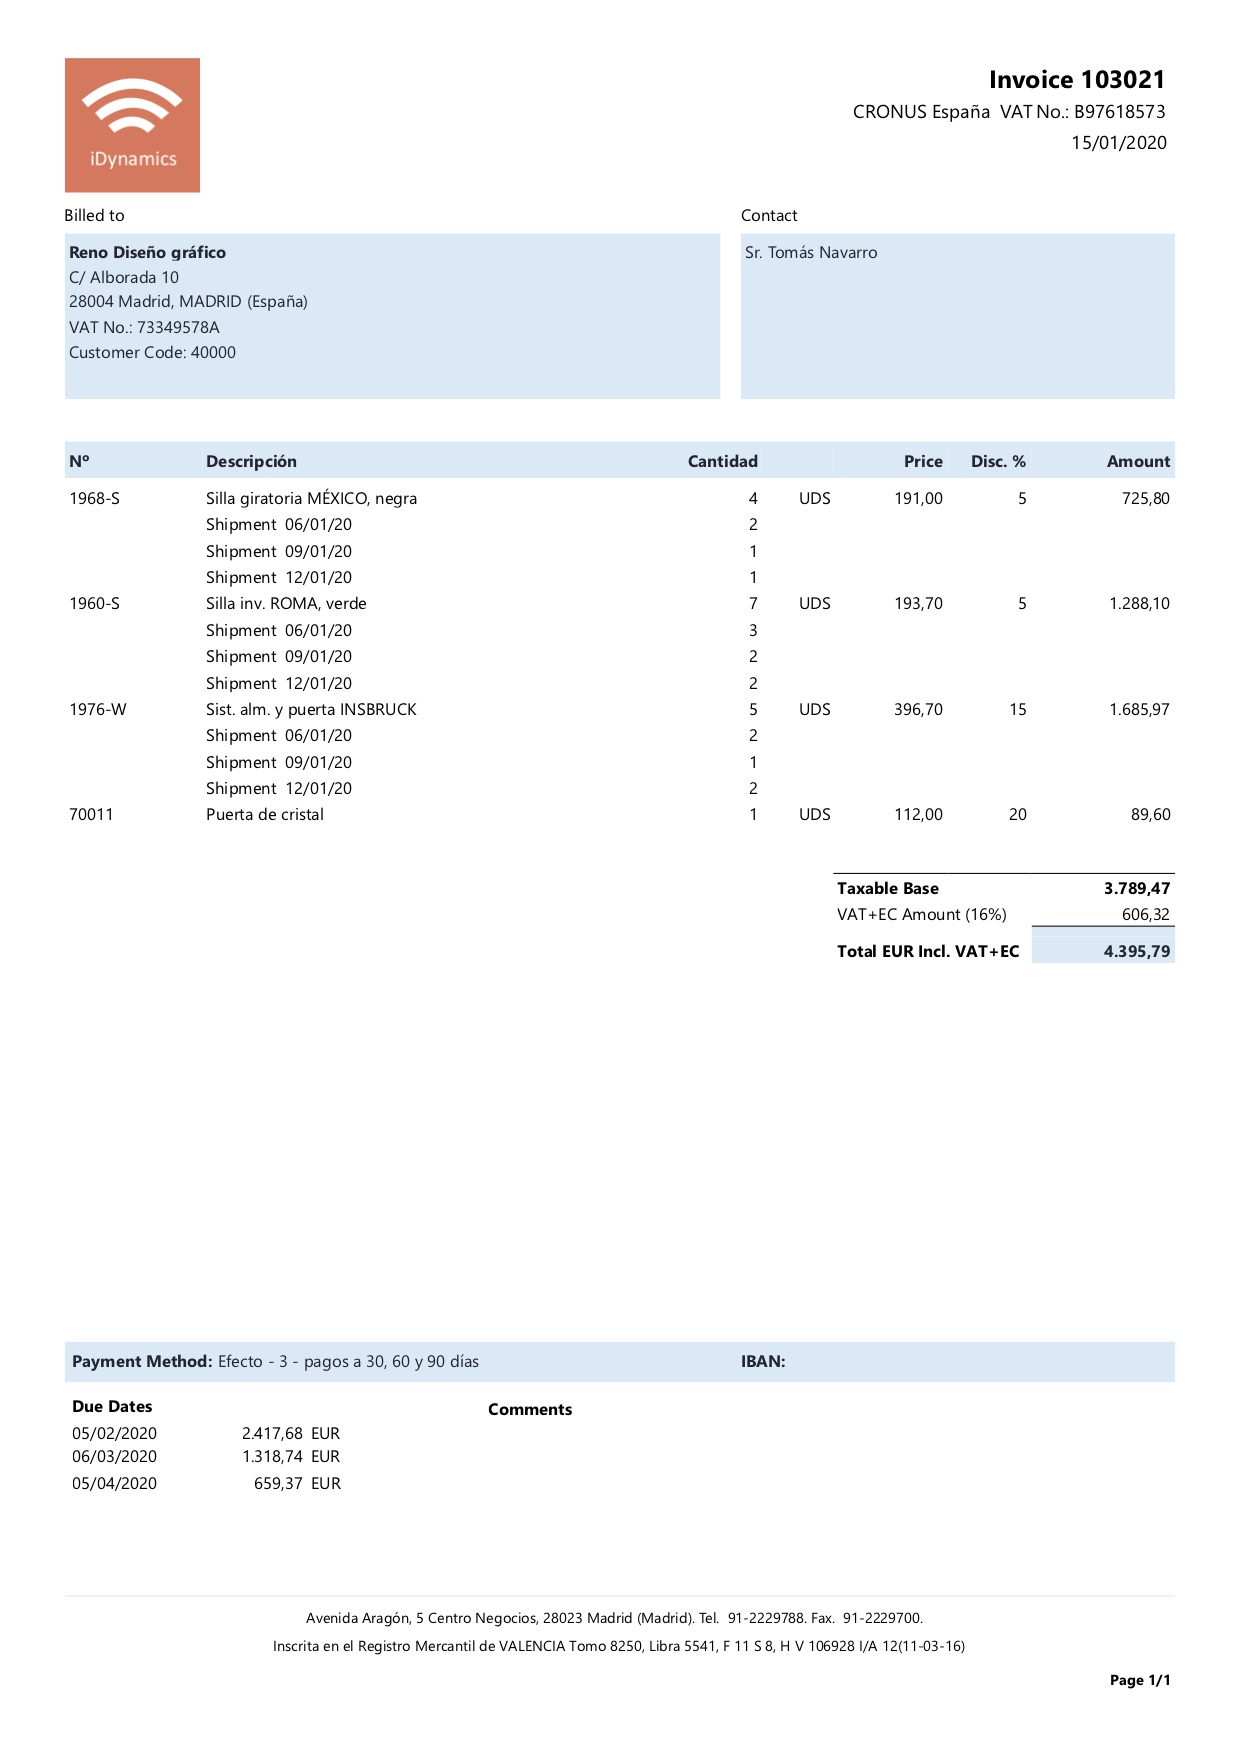 Example of sales invoice